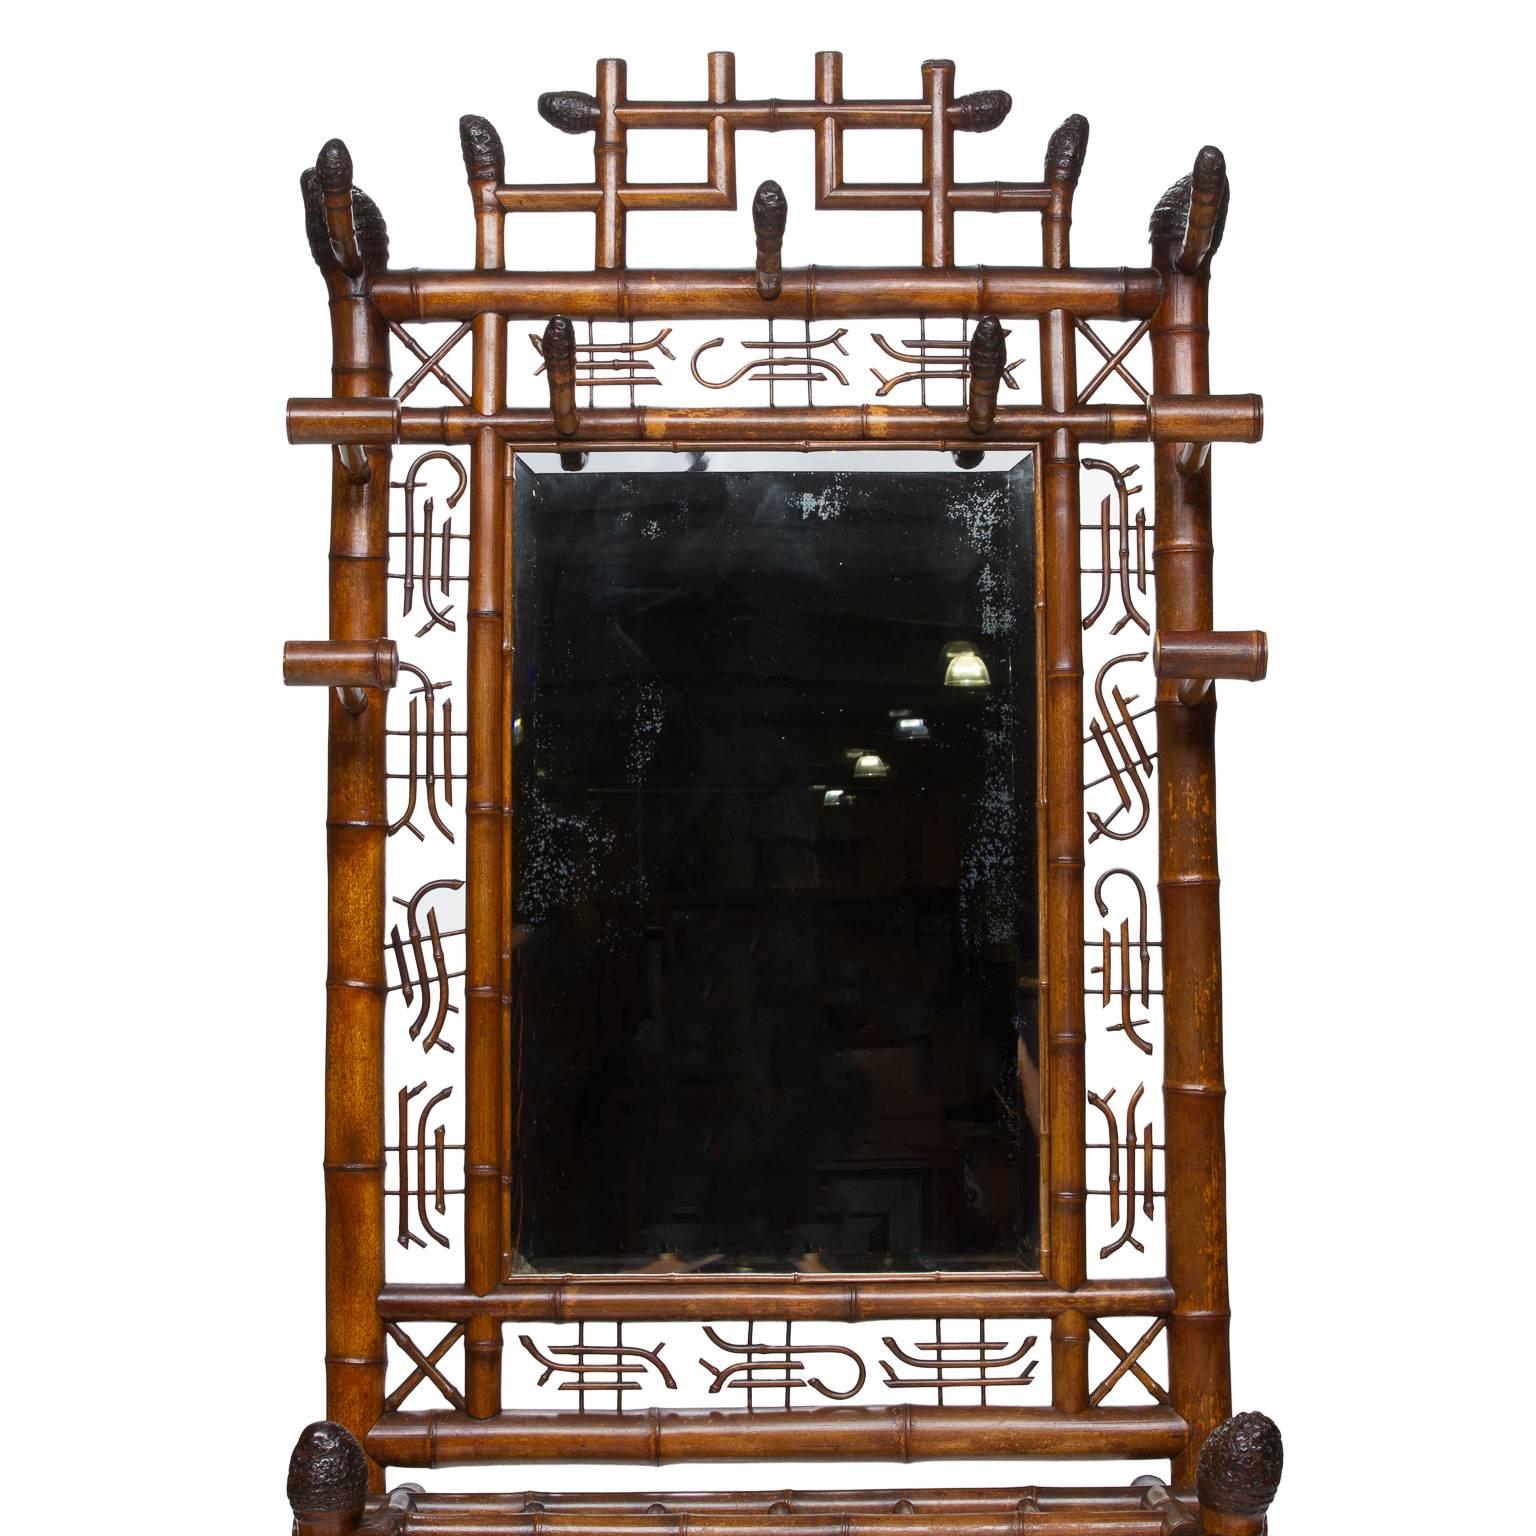 Bamboo constructed hall tree with a mirror surrounded by script suspended with wooden dowels. Hat and coat supports. Wonderful patina and aging of the mirror too. Very nice quality, the carved ends of the supports the workmanship to evenly suspend